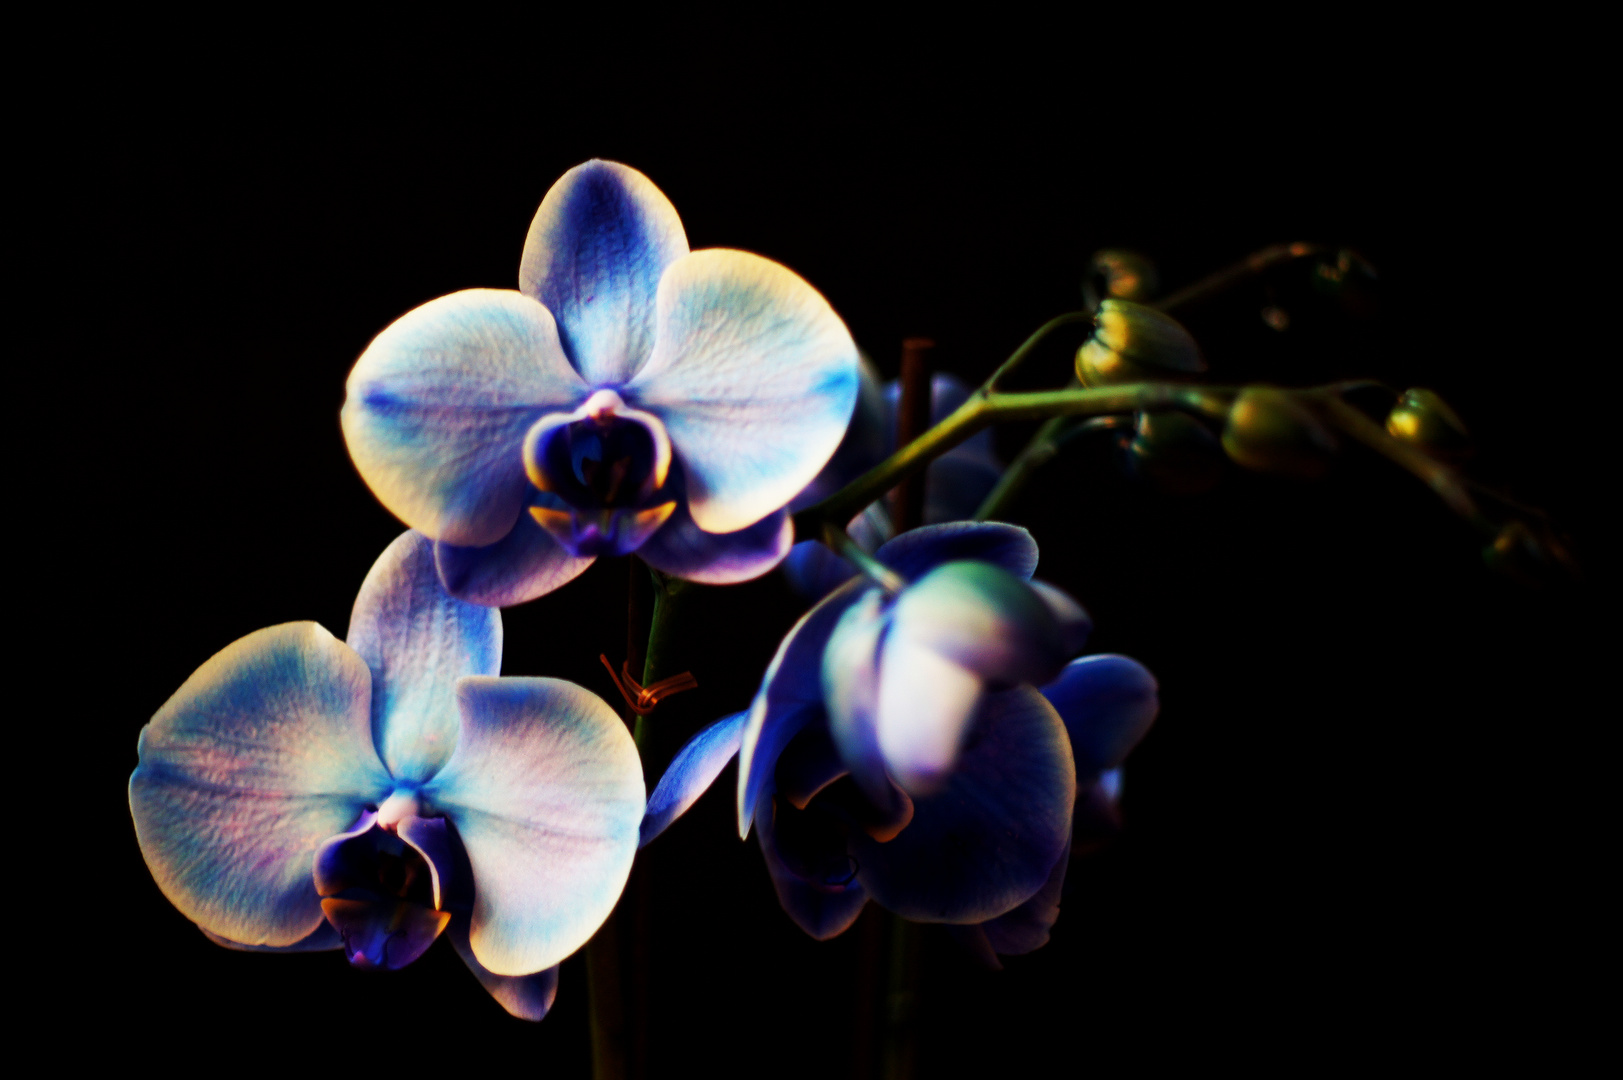 Blue orchid - blaue Orchidee